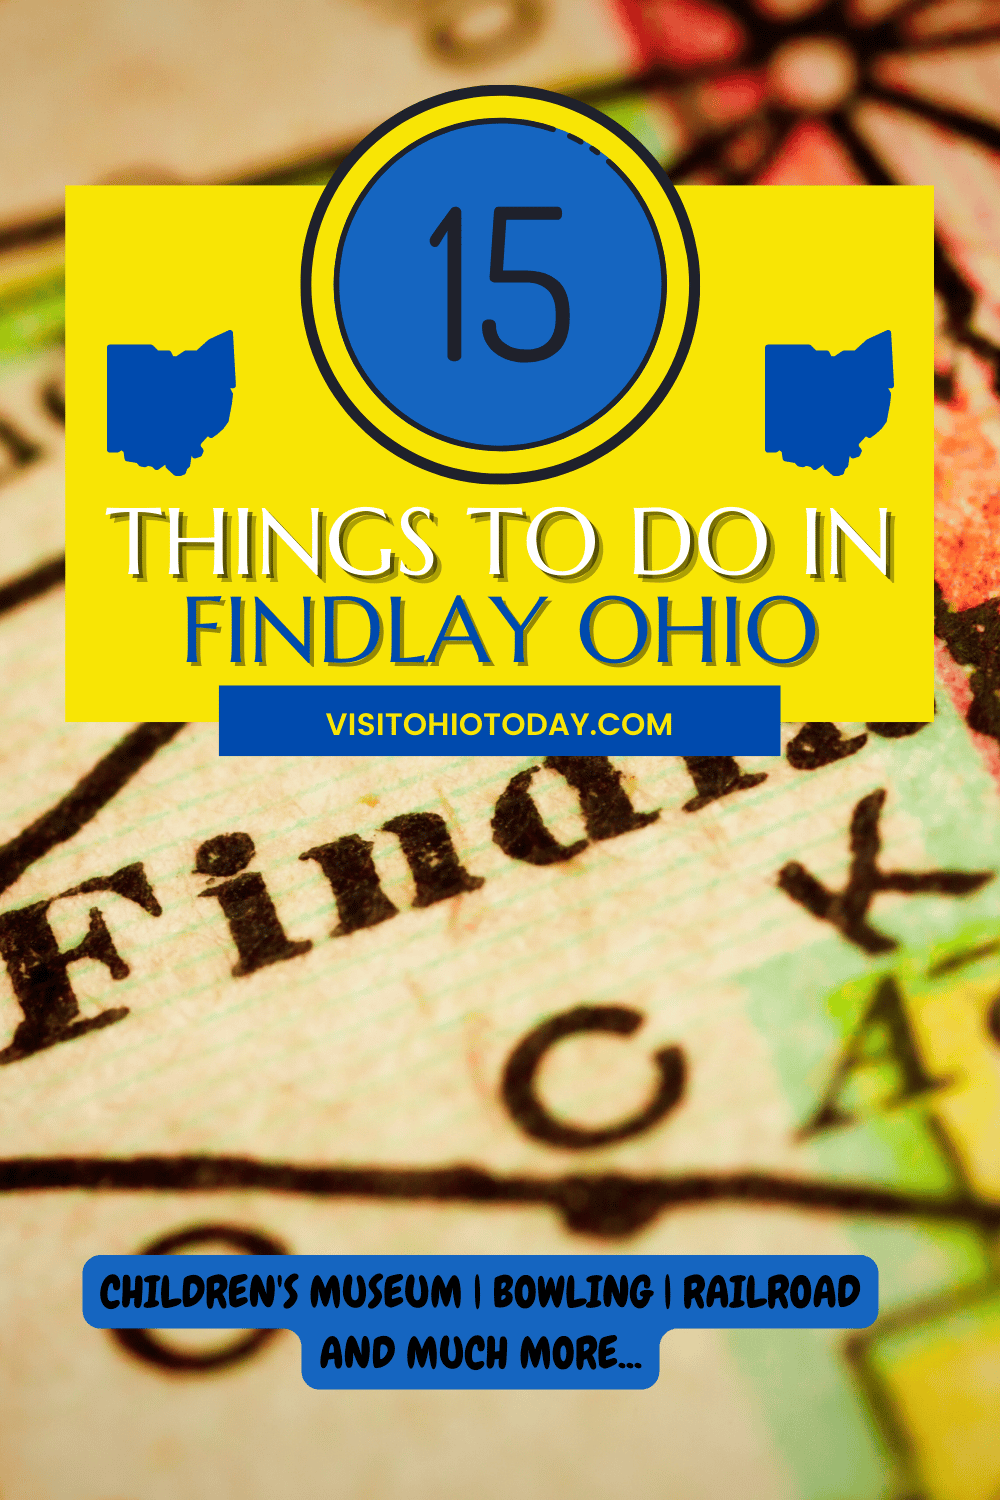 Findlay is known across the United States for its beautiful natural attractions and areas of outstanding beauty. If you love being out in the countryside doing various outdoor activities, then this is the place for you! If you prefer to do things inside, it also boasts art galleries and museums. Below are 15 of the best things to do in Findlay Ohio. | Things To Do In Findlay Ohio | Findlay Ohio | Hancock County